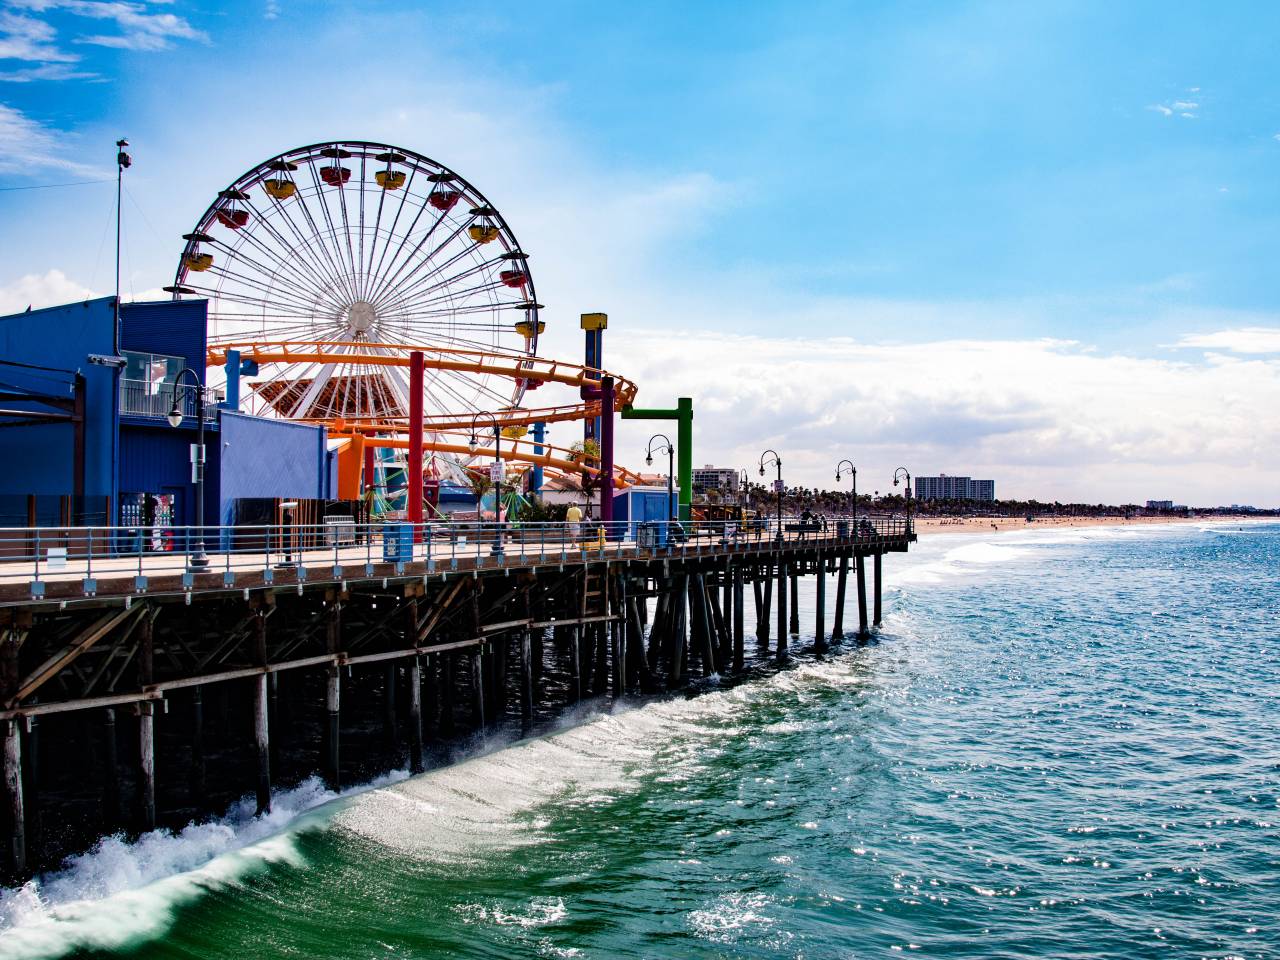 The Santa Monica Pier is a large double-jointed pier at the foot of Colorado Avenue in Santa Monica, California.